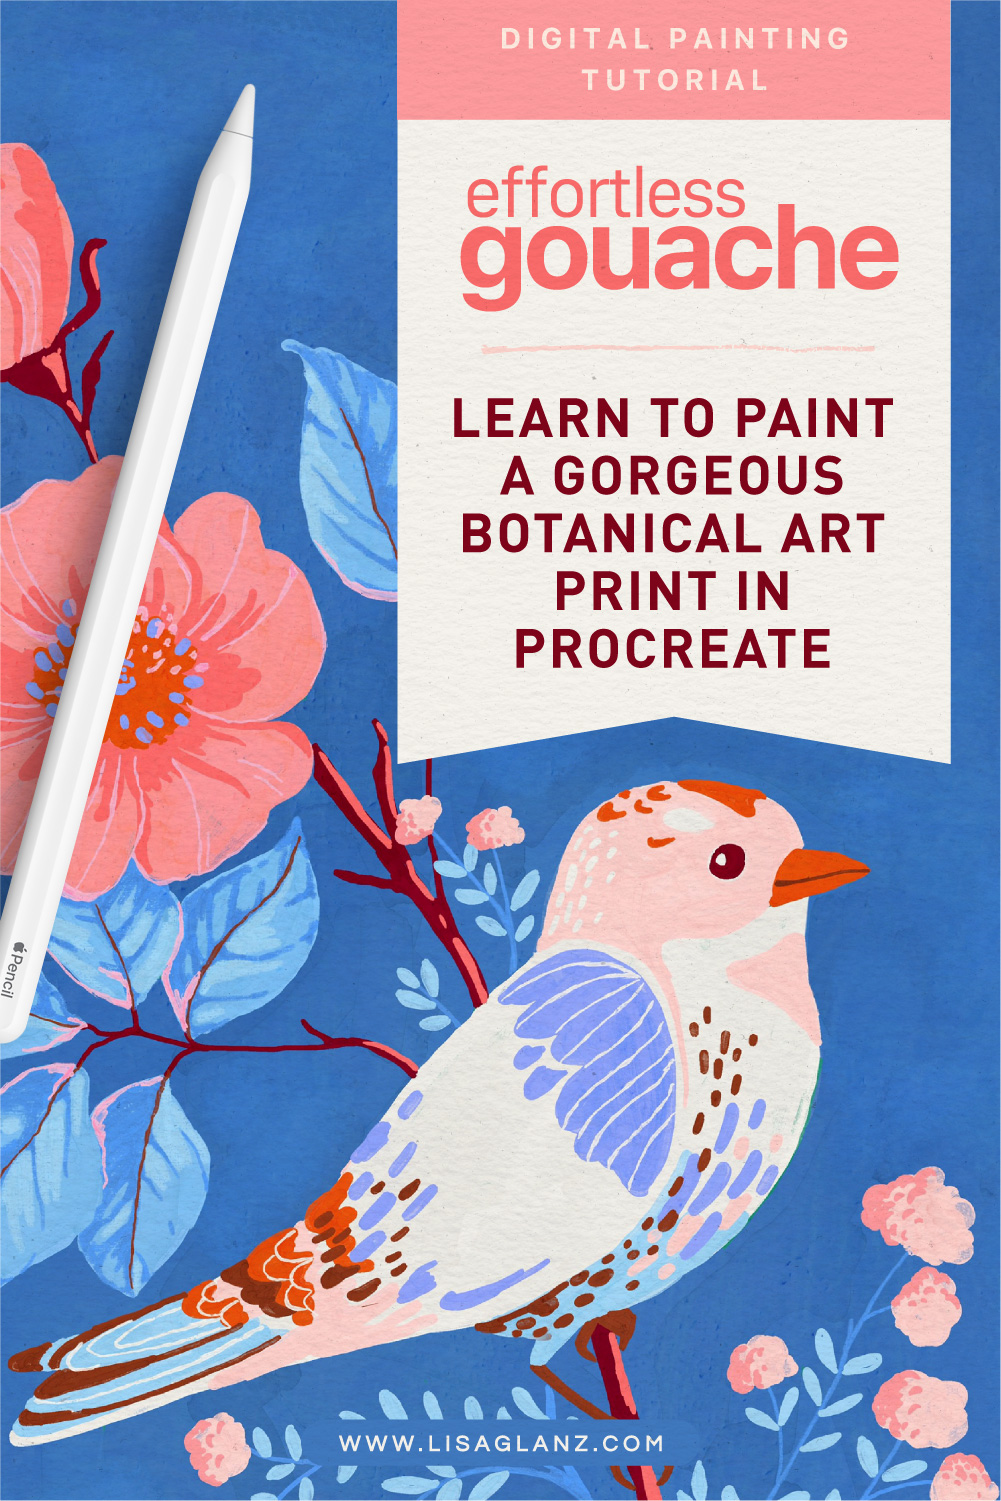 Learn to paint a beautiful botanical art print with Gouache in Procreate